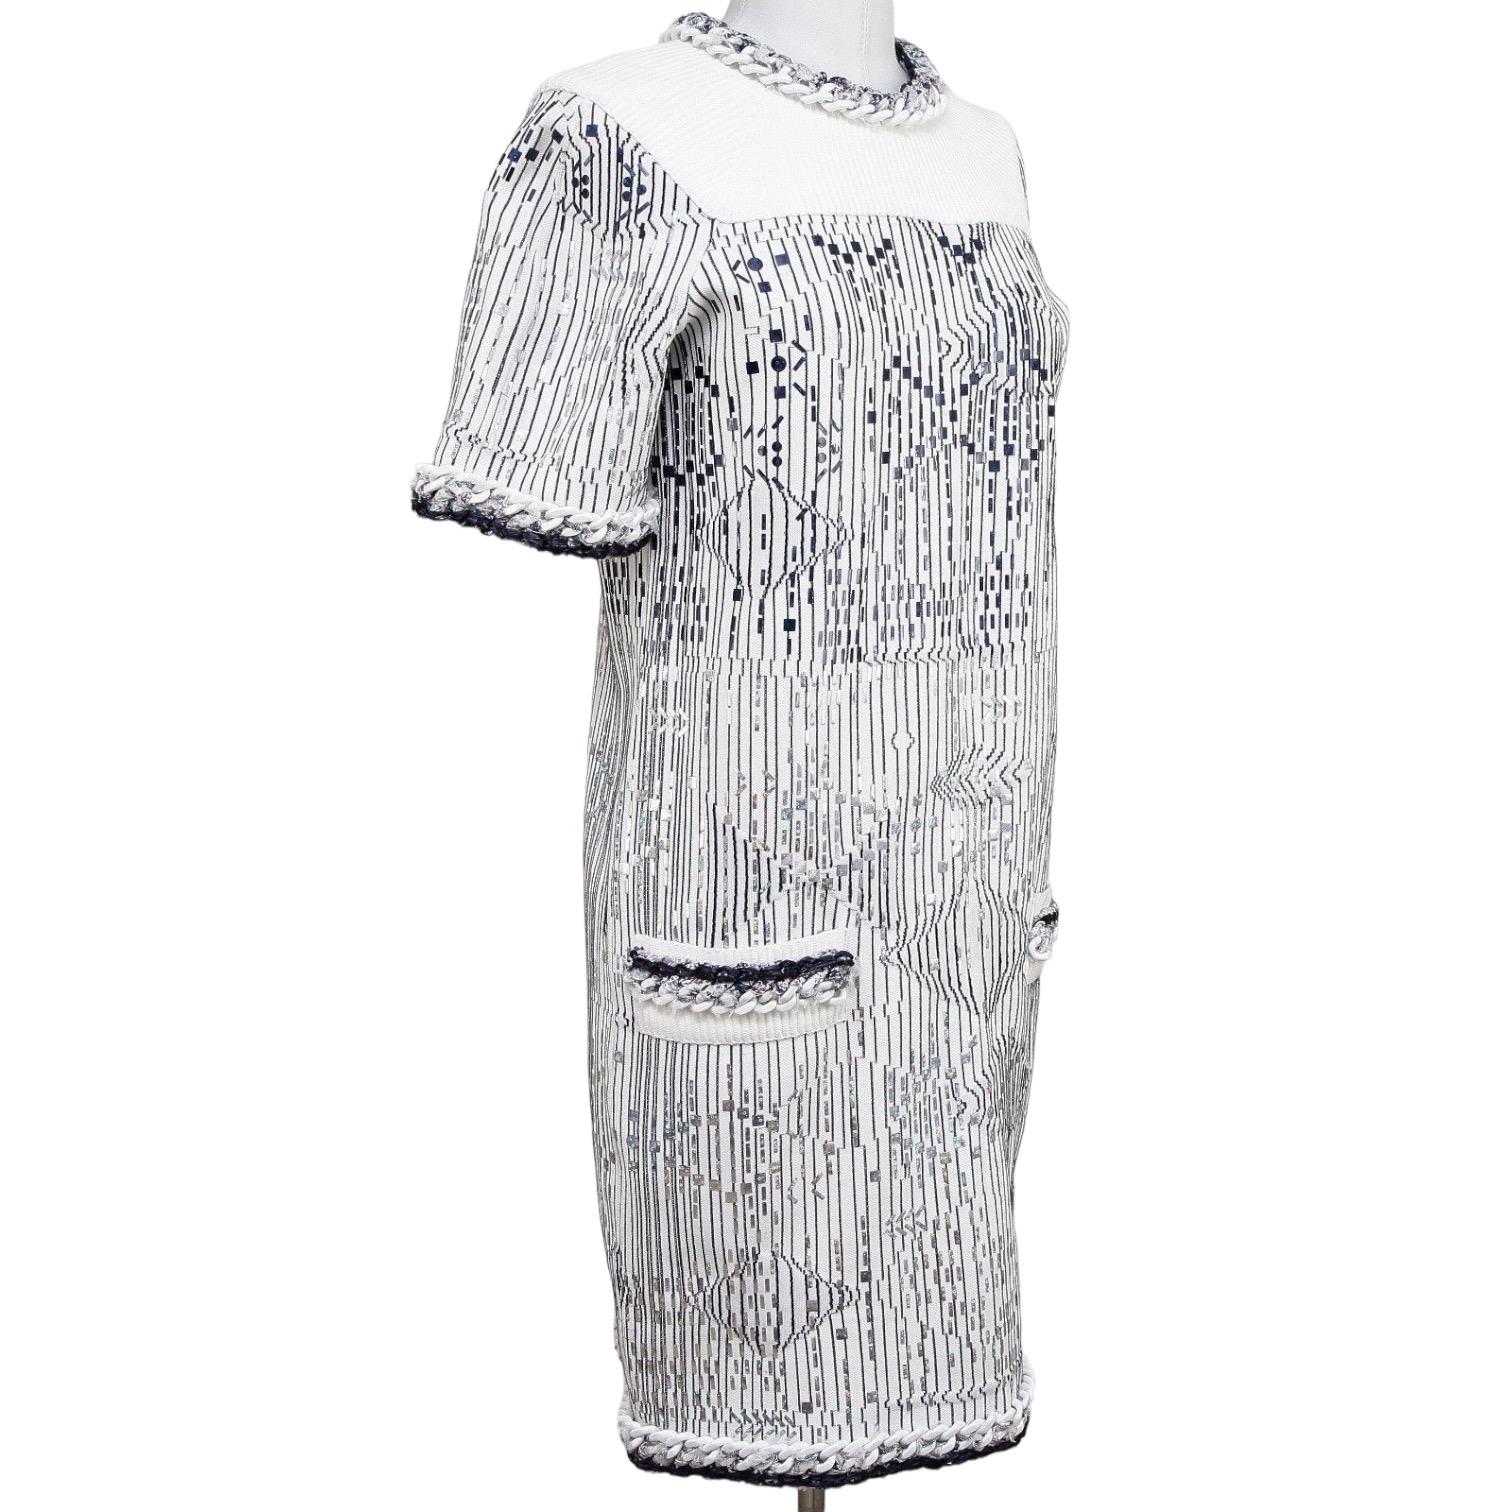 GUARANTEED AUTHENTIC SPRING 2014 TERRIFIC CHANEL METALLIC KNIT SHIFT DRESS
 Retail: $6800

 

Design:
- Blue and silver metallic pattern on a white stretchy knit dress.
- Chain accents.
- Slip pockets at hips.
- Slip on style with rear keyhole and